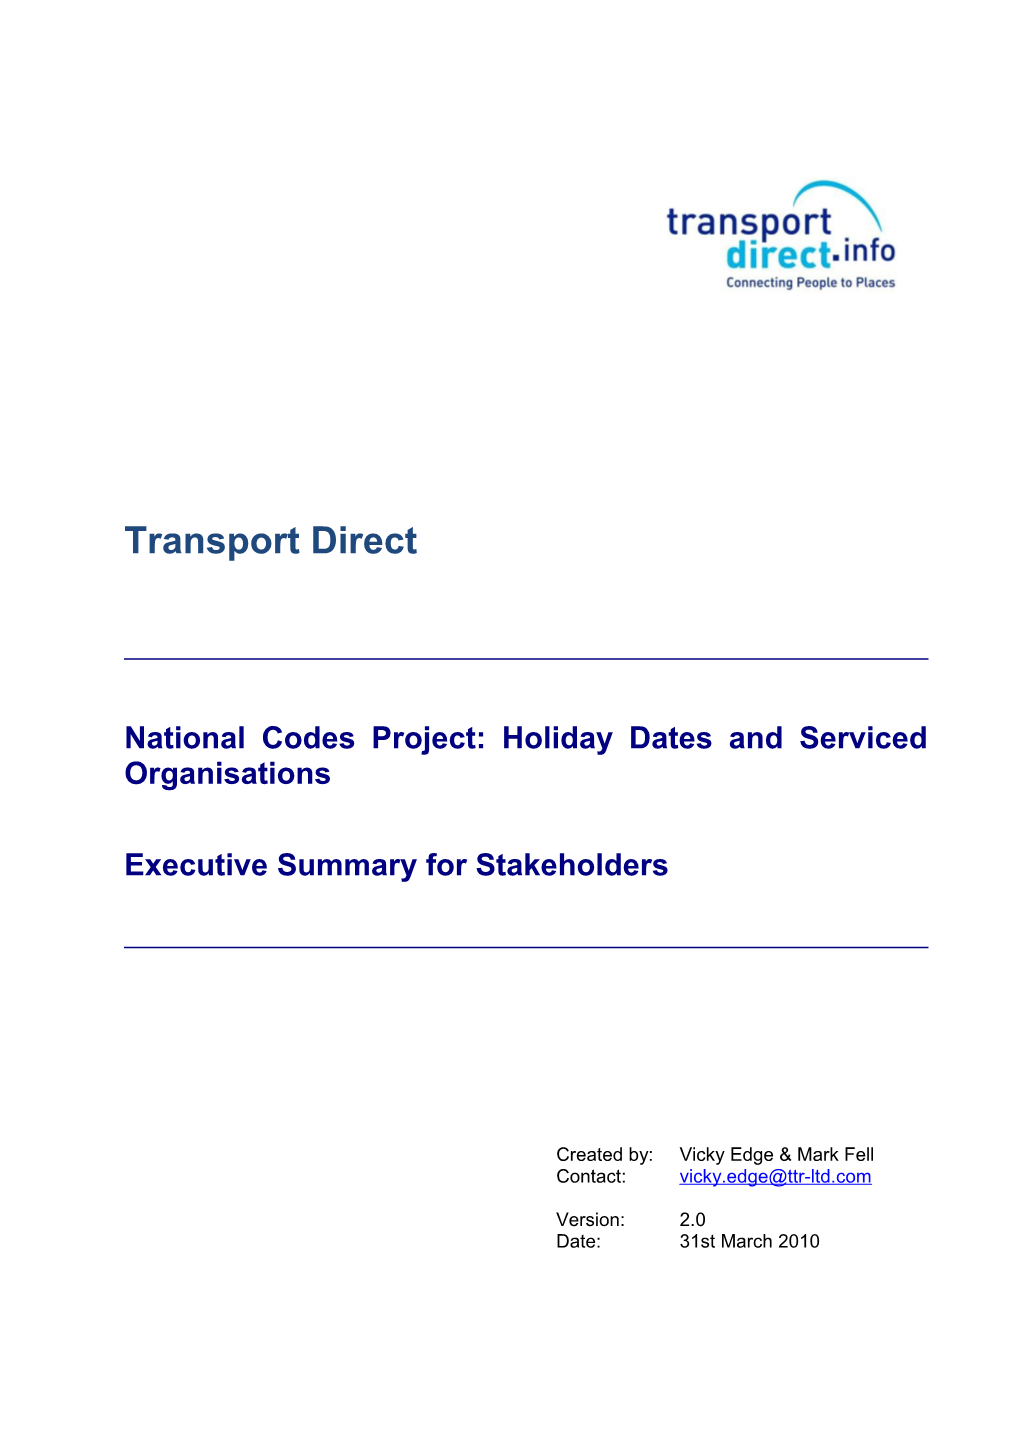 National Codes Project - Holidays and Schools